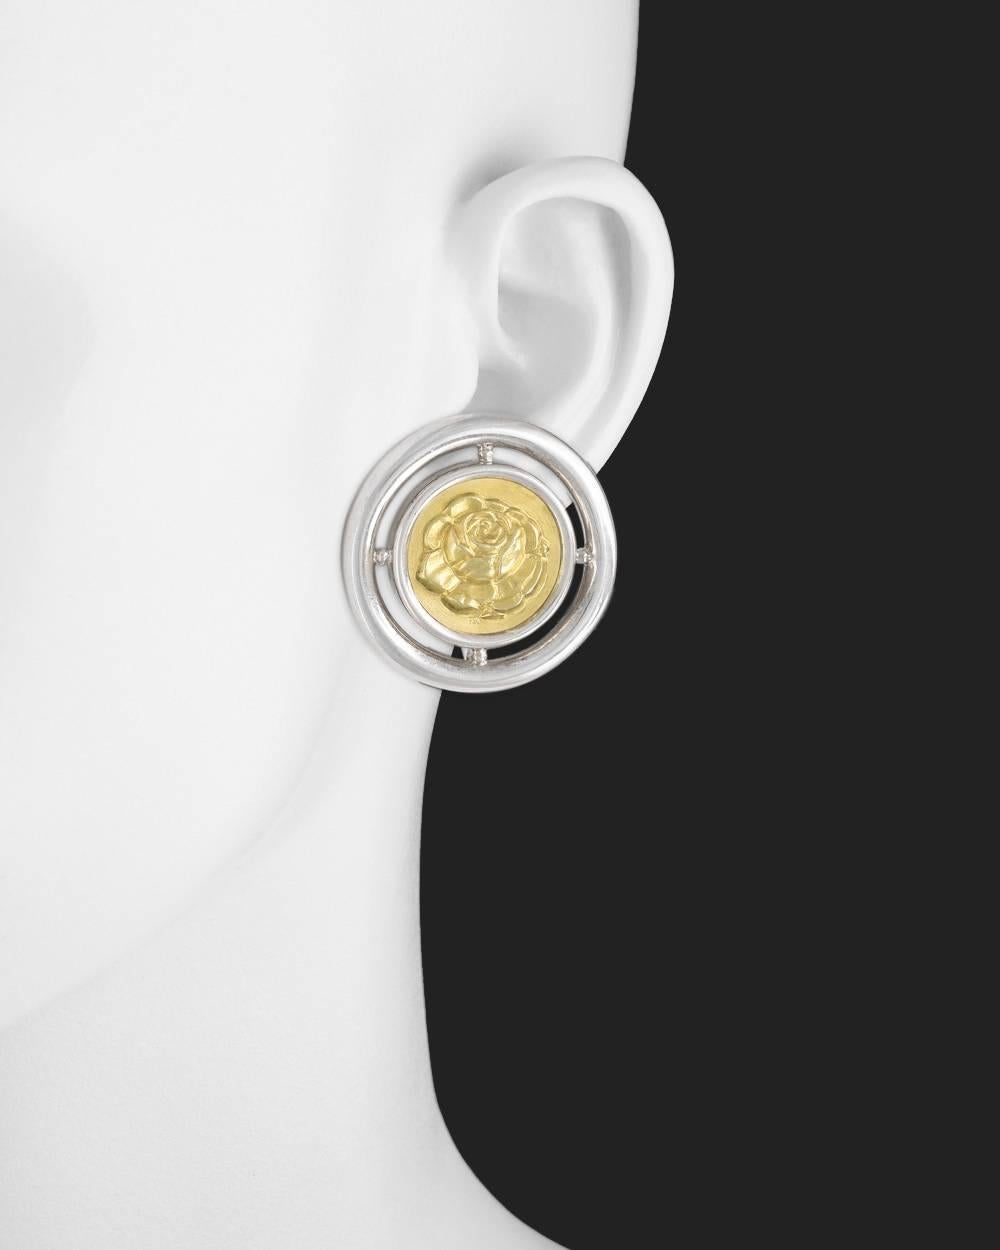 Round earclips, in sterling silver with 18k yellow gold rose motif centers, made in Greece, with stamps for Ilias Lalaounis. 1.3" diameter. 26.9 grams total weight.